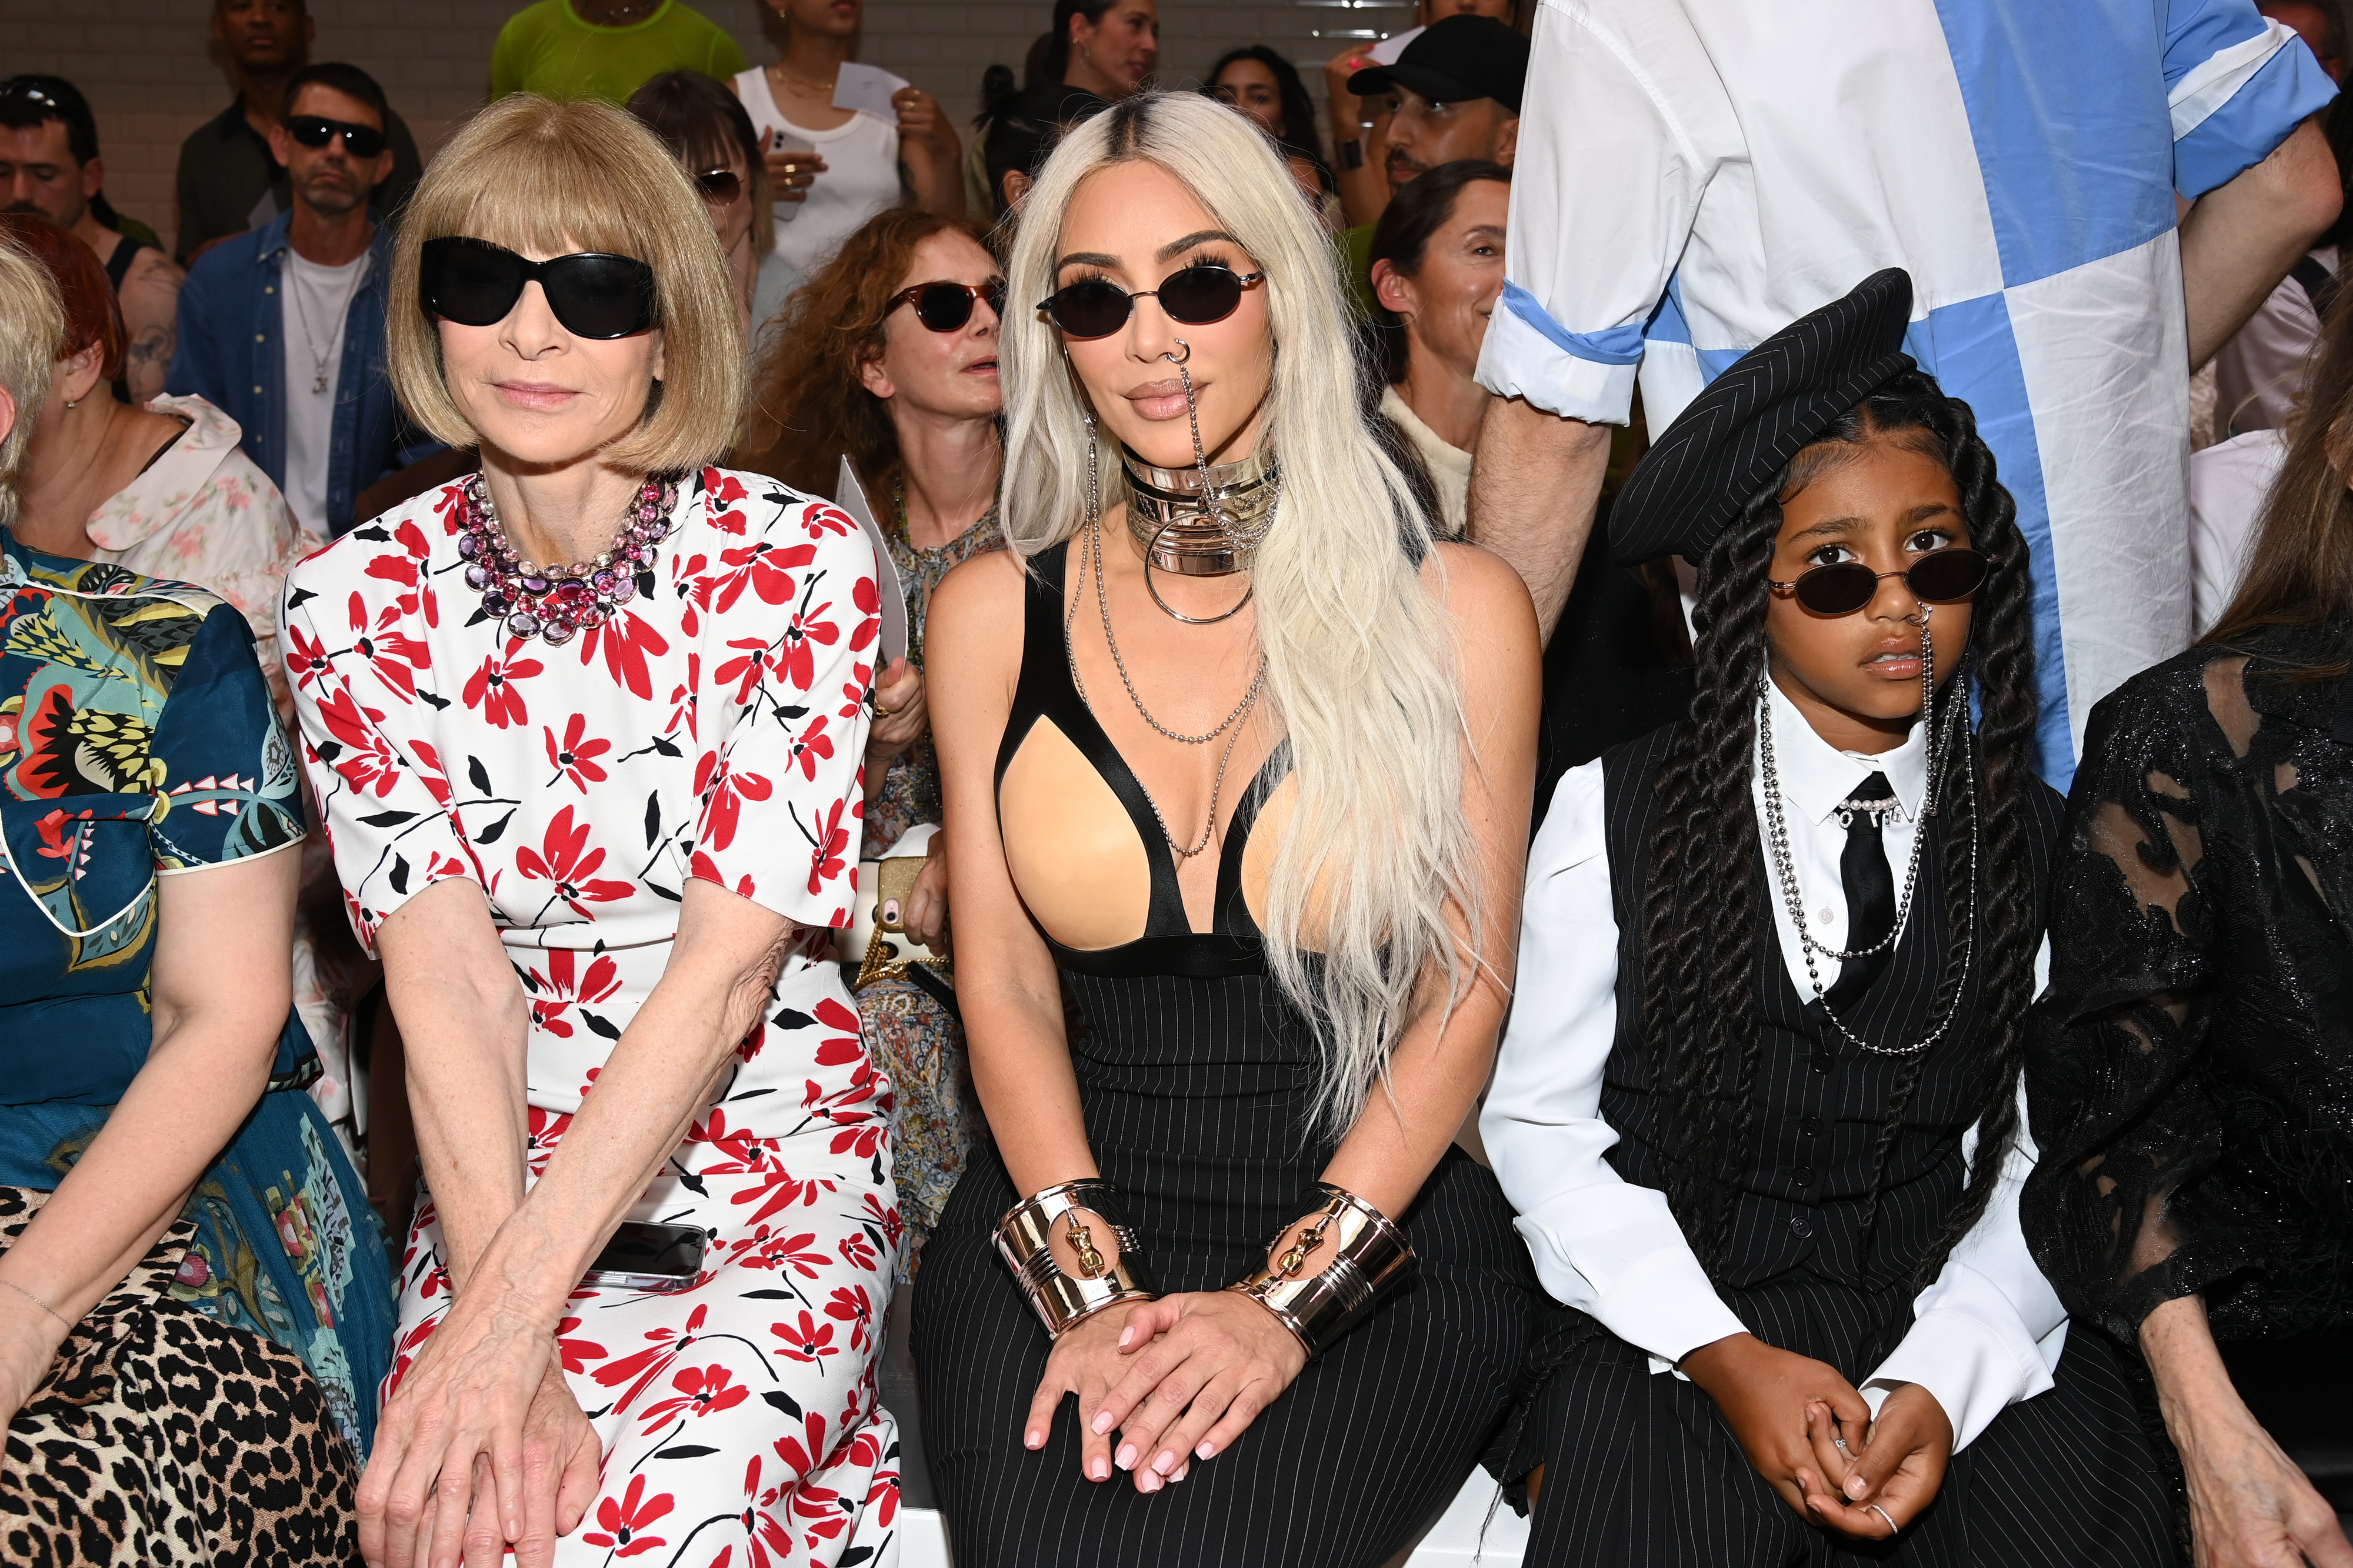 Anna Wintour, Kim Kardashian, and North West sitting front row at a runway show